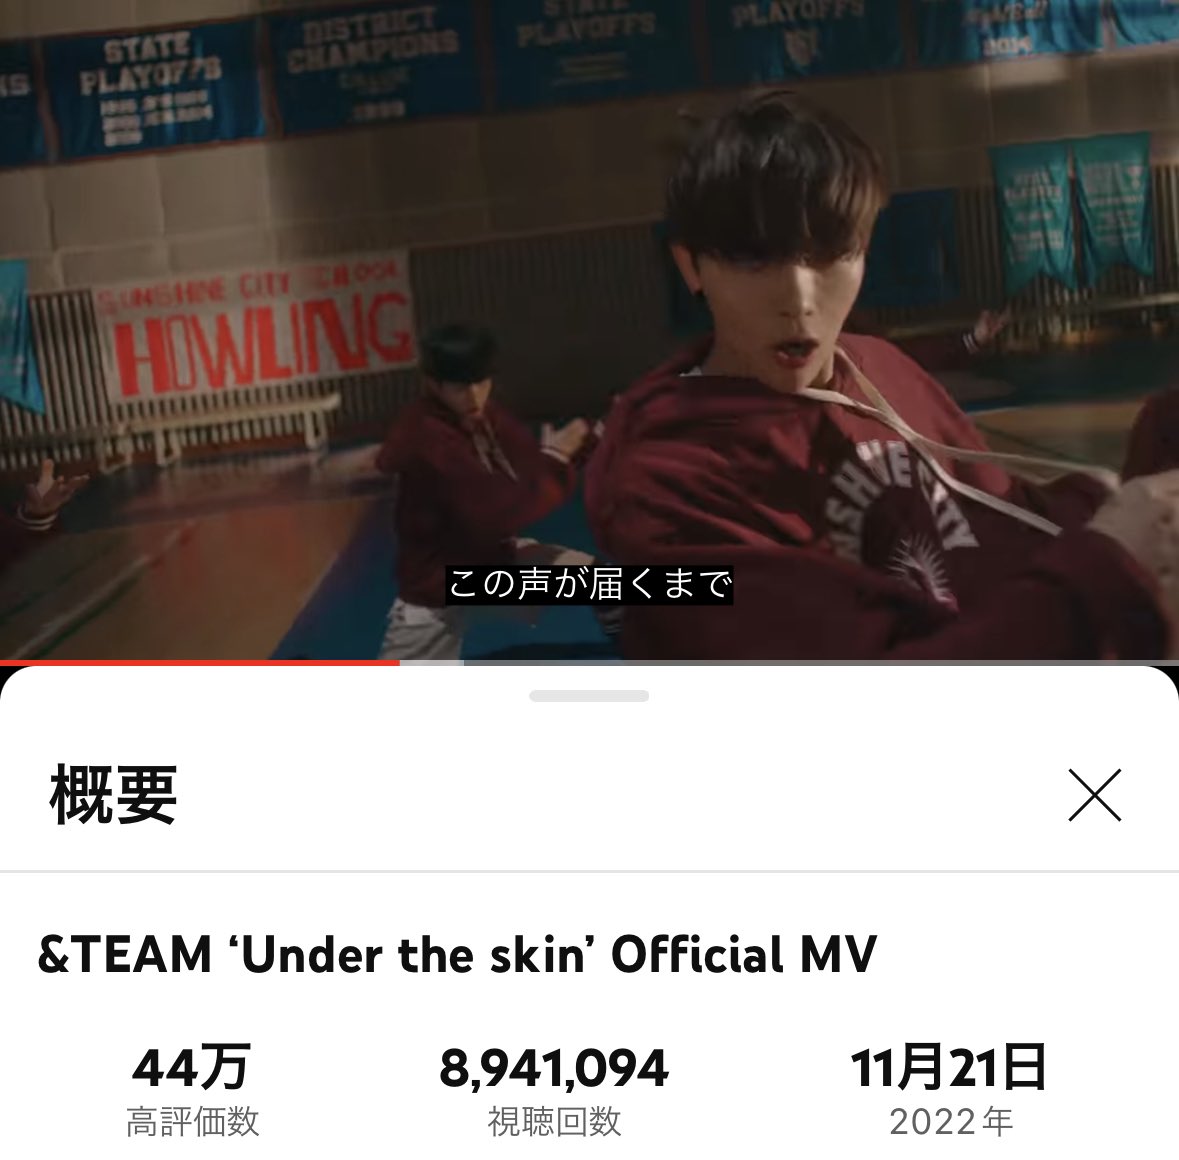 @andTEAM_Stream @andTEAMSTREAM @HYBEJPBoyStream &TEAMが私の生き甲斐！
LUNÉファイティン♡

 #andTEAM  #앤팀
 #Under_the_skin 
 #FirstHowling_ME
 #andTEAM_Roadto10M